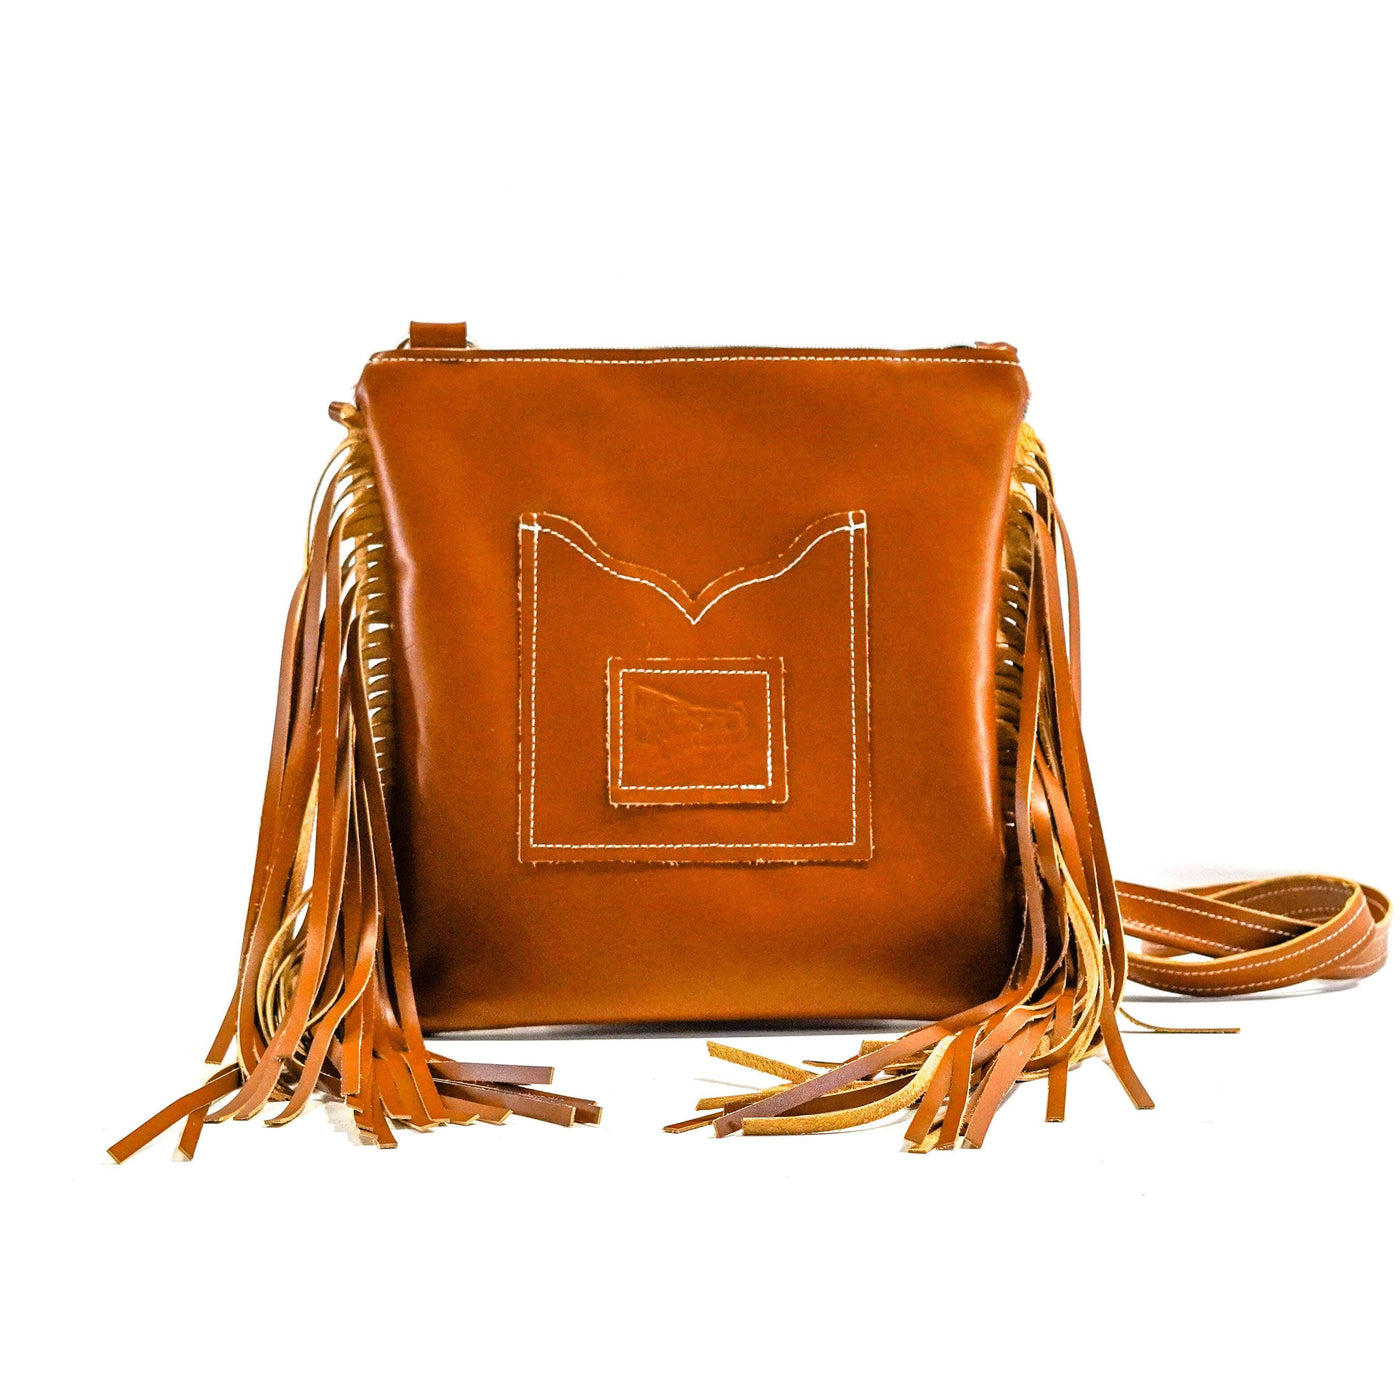 Shania - Brindle w/ Dulce De Leche Leather-Shania-Western-Cowhide-Bags-Handmade-Products-Gifts-Dancing Cactus Designs